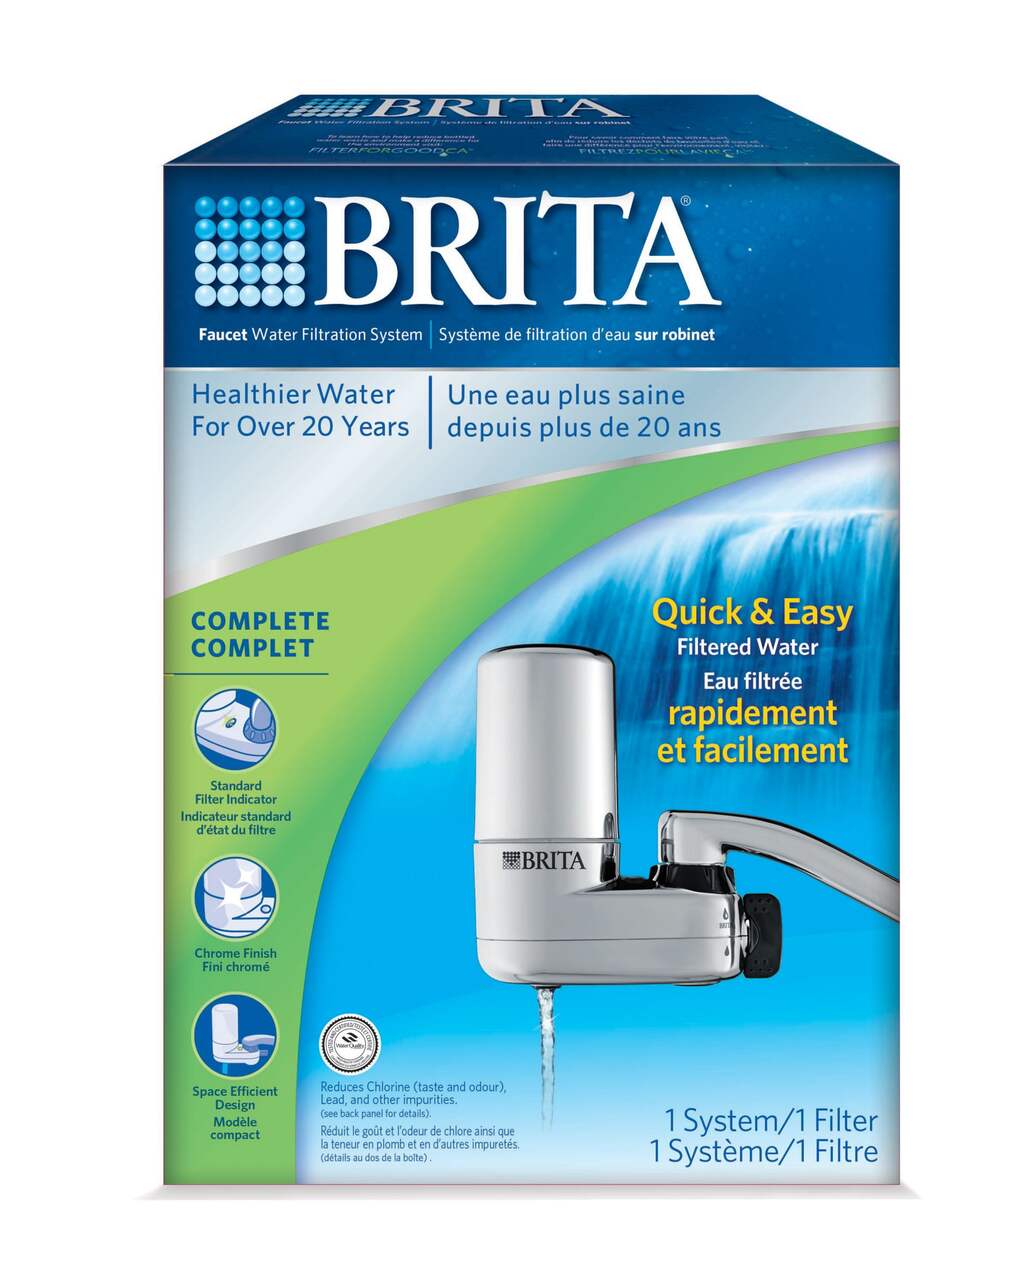 Brita tap filter leaking from the part that screws onto the tap any ideas  on how to fix this. The whole filter has been taken of and cleaned the  screen on the